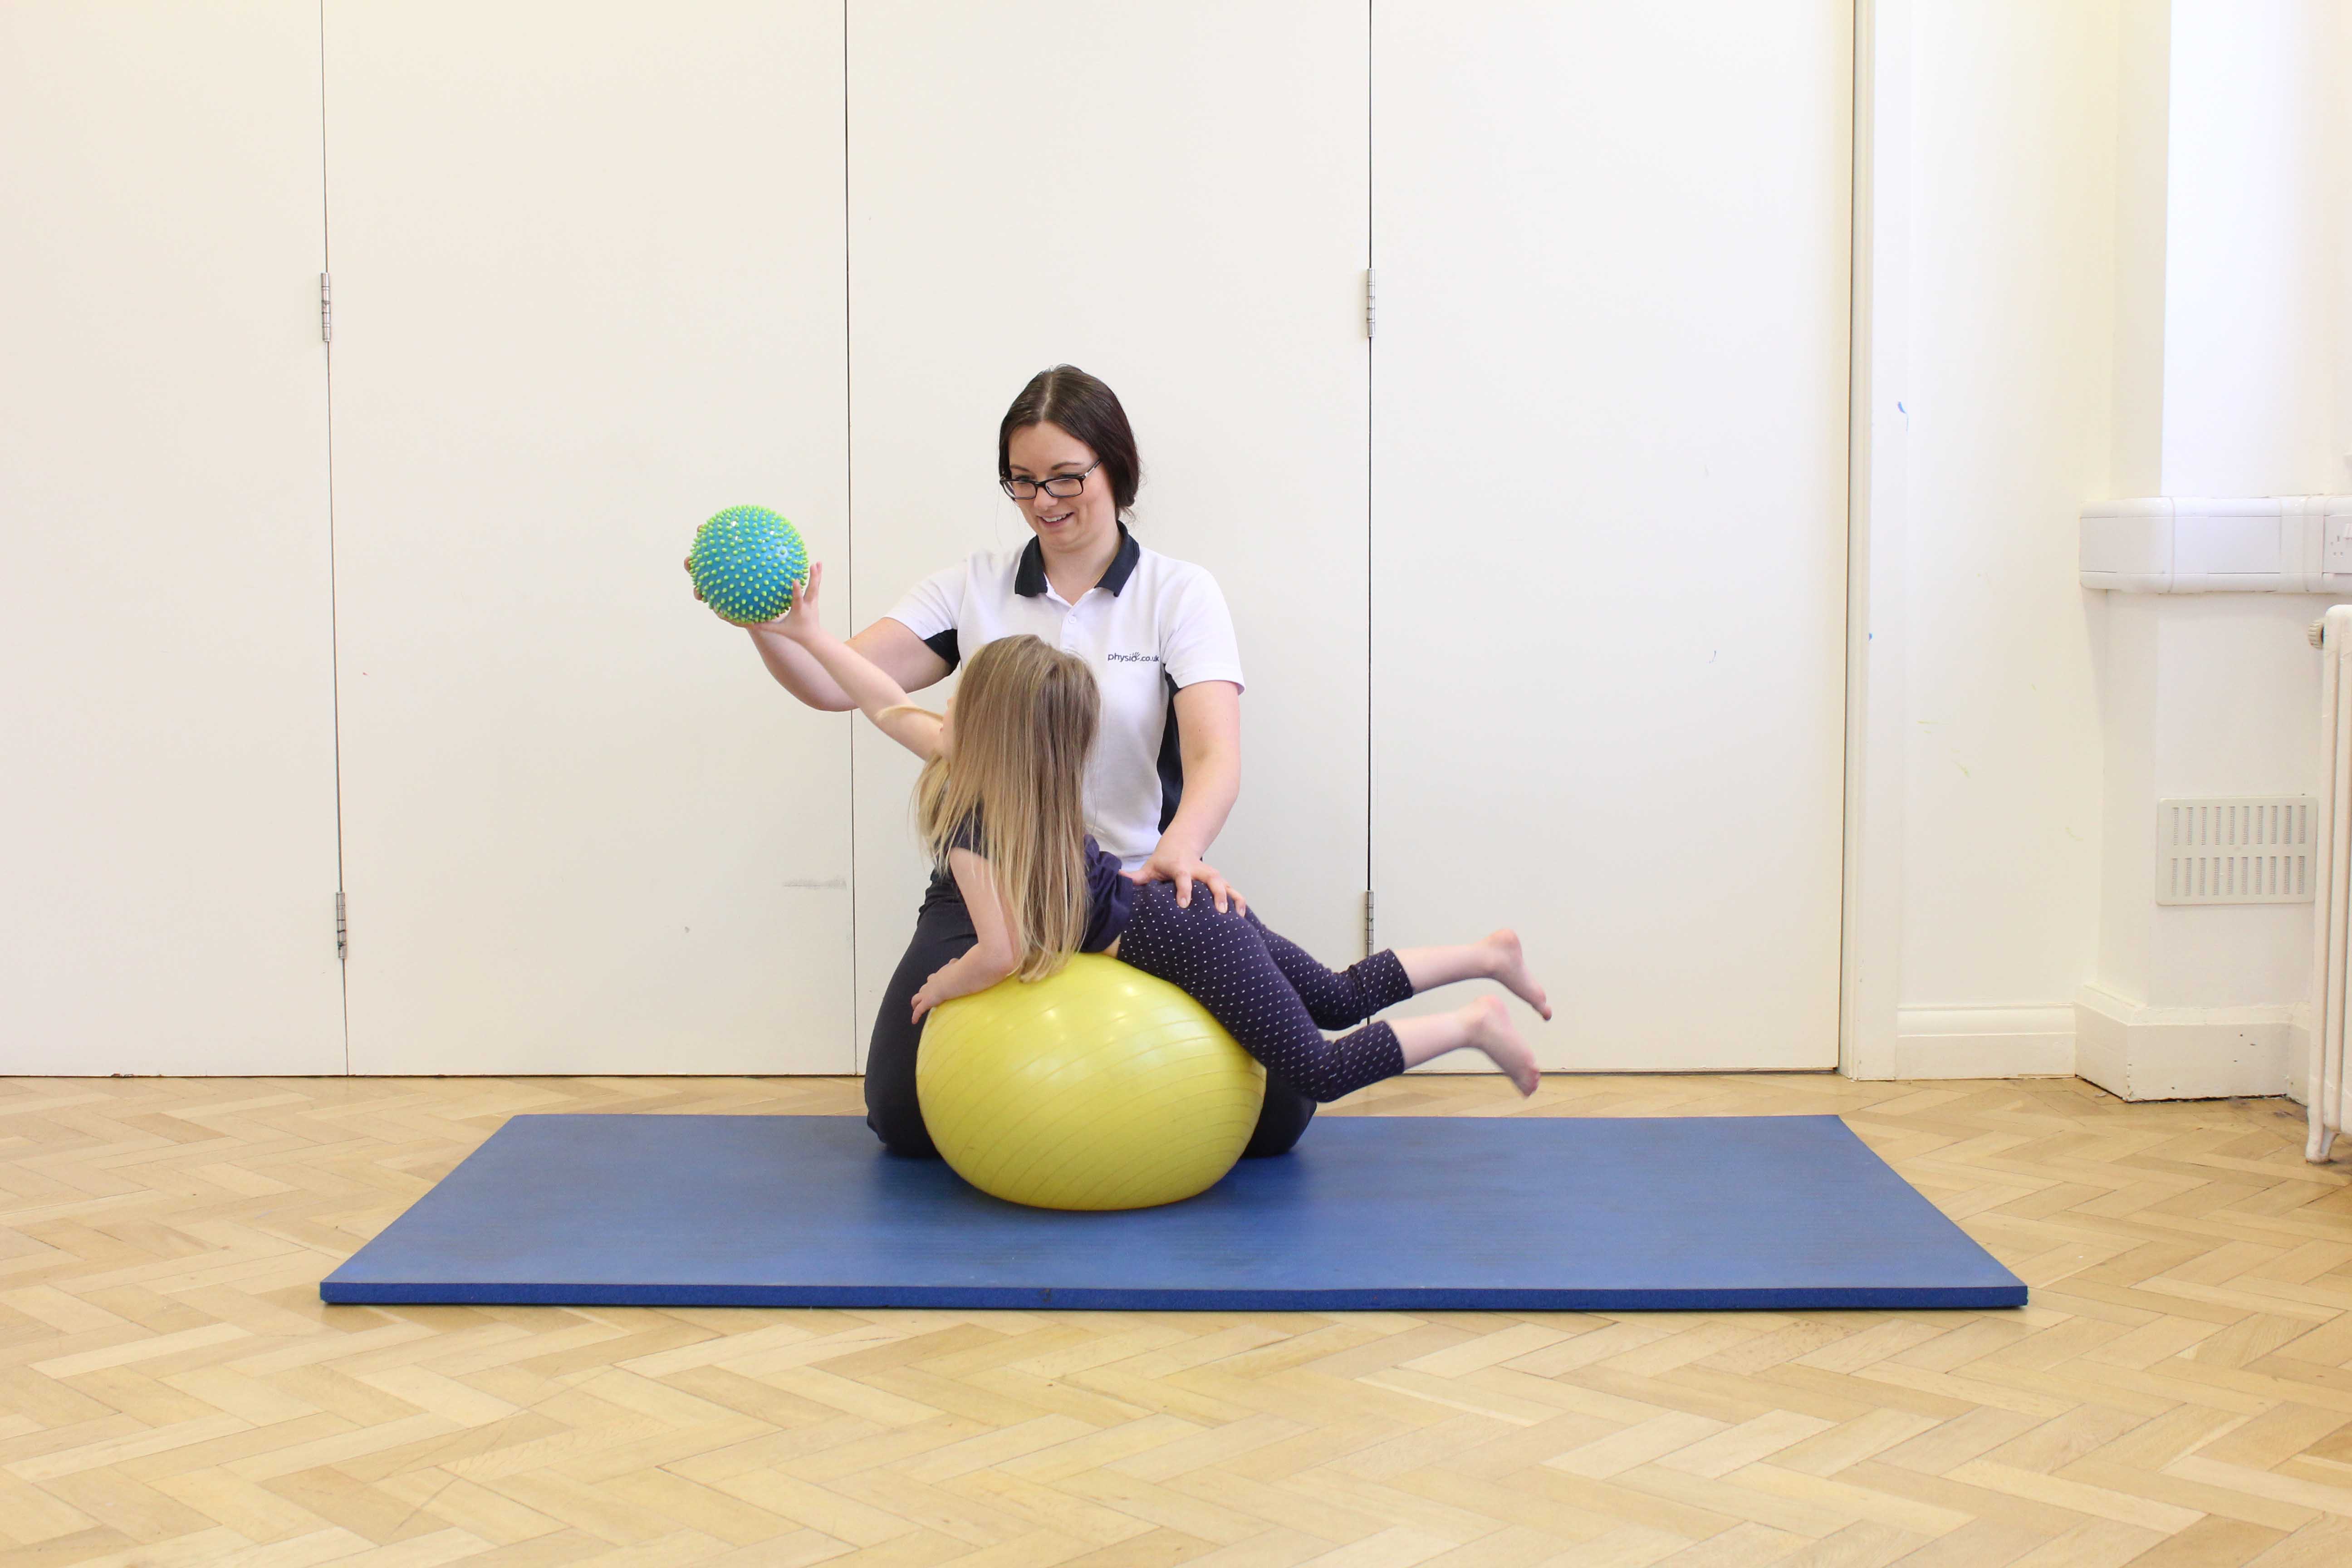 Active stretching exercises over a gym ball under close supervision of specialist paediatric physiotherapist